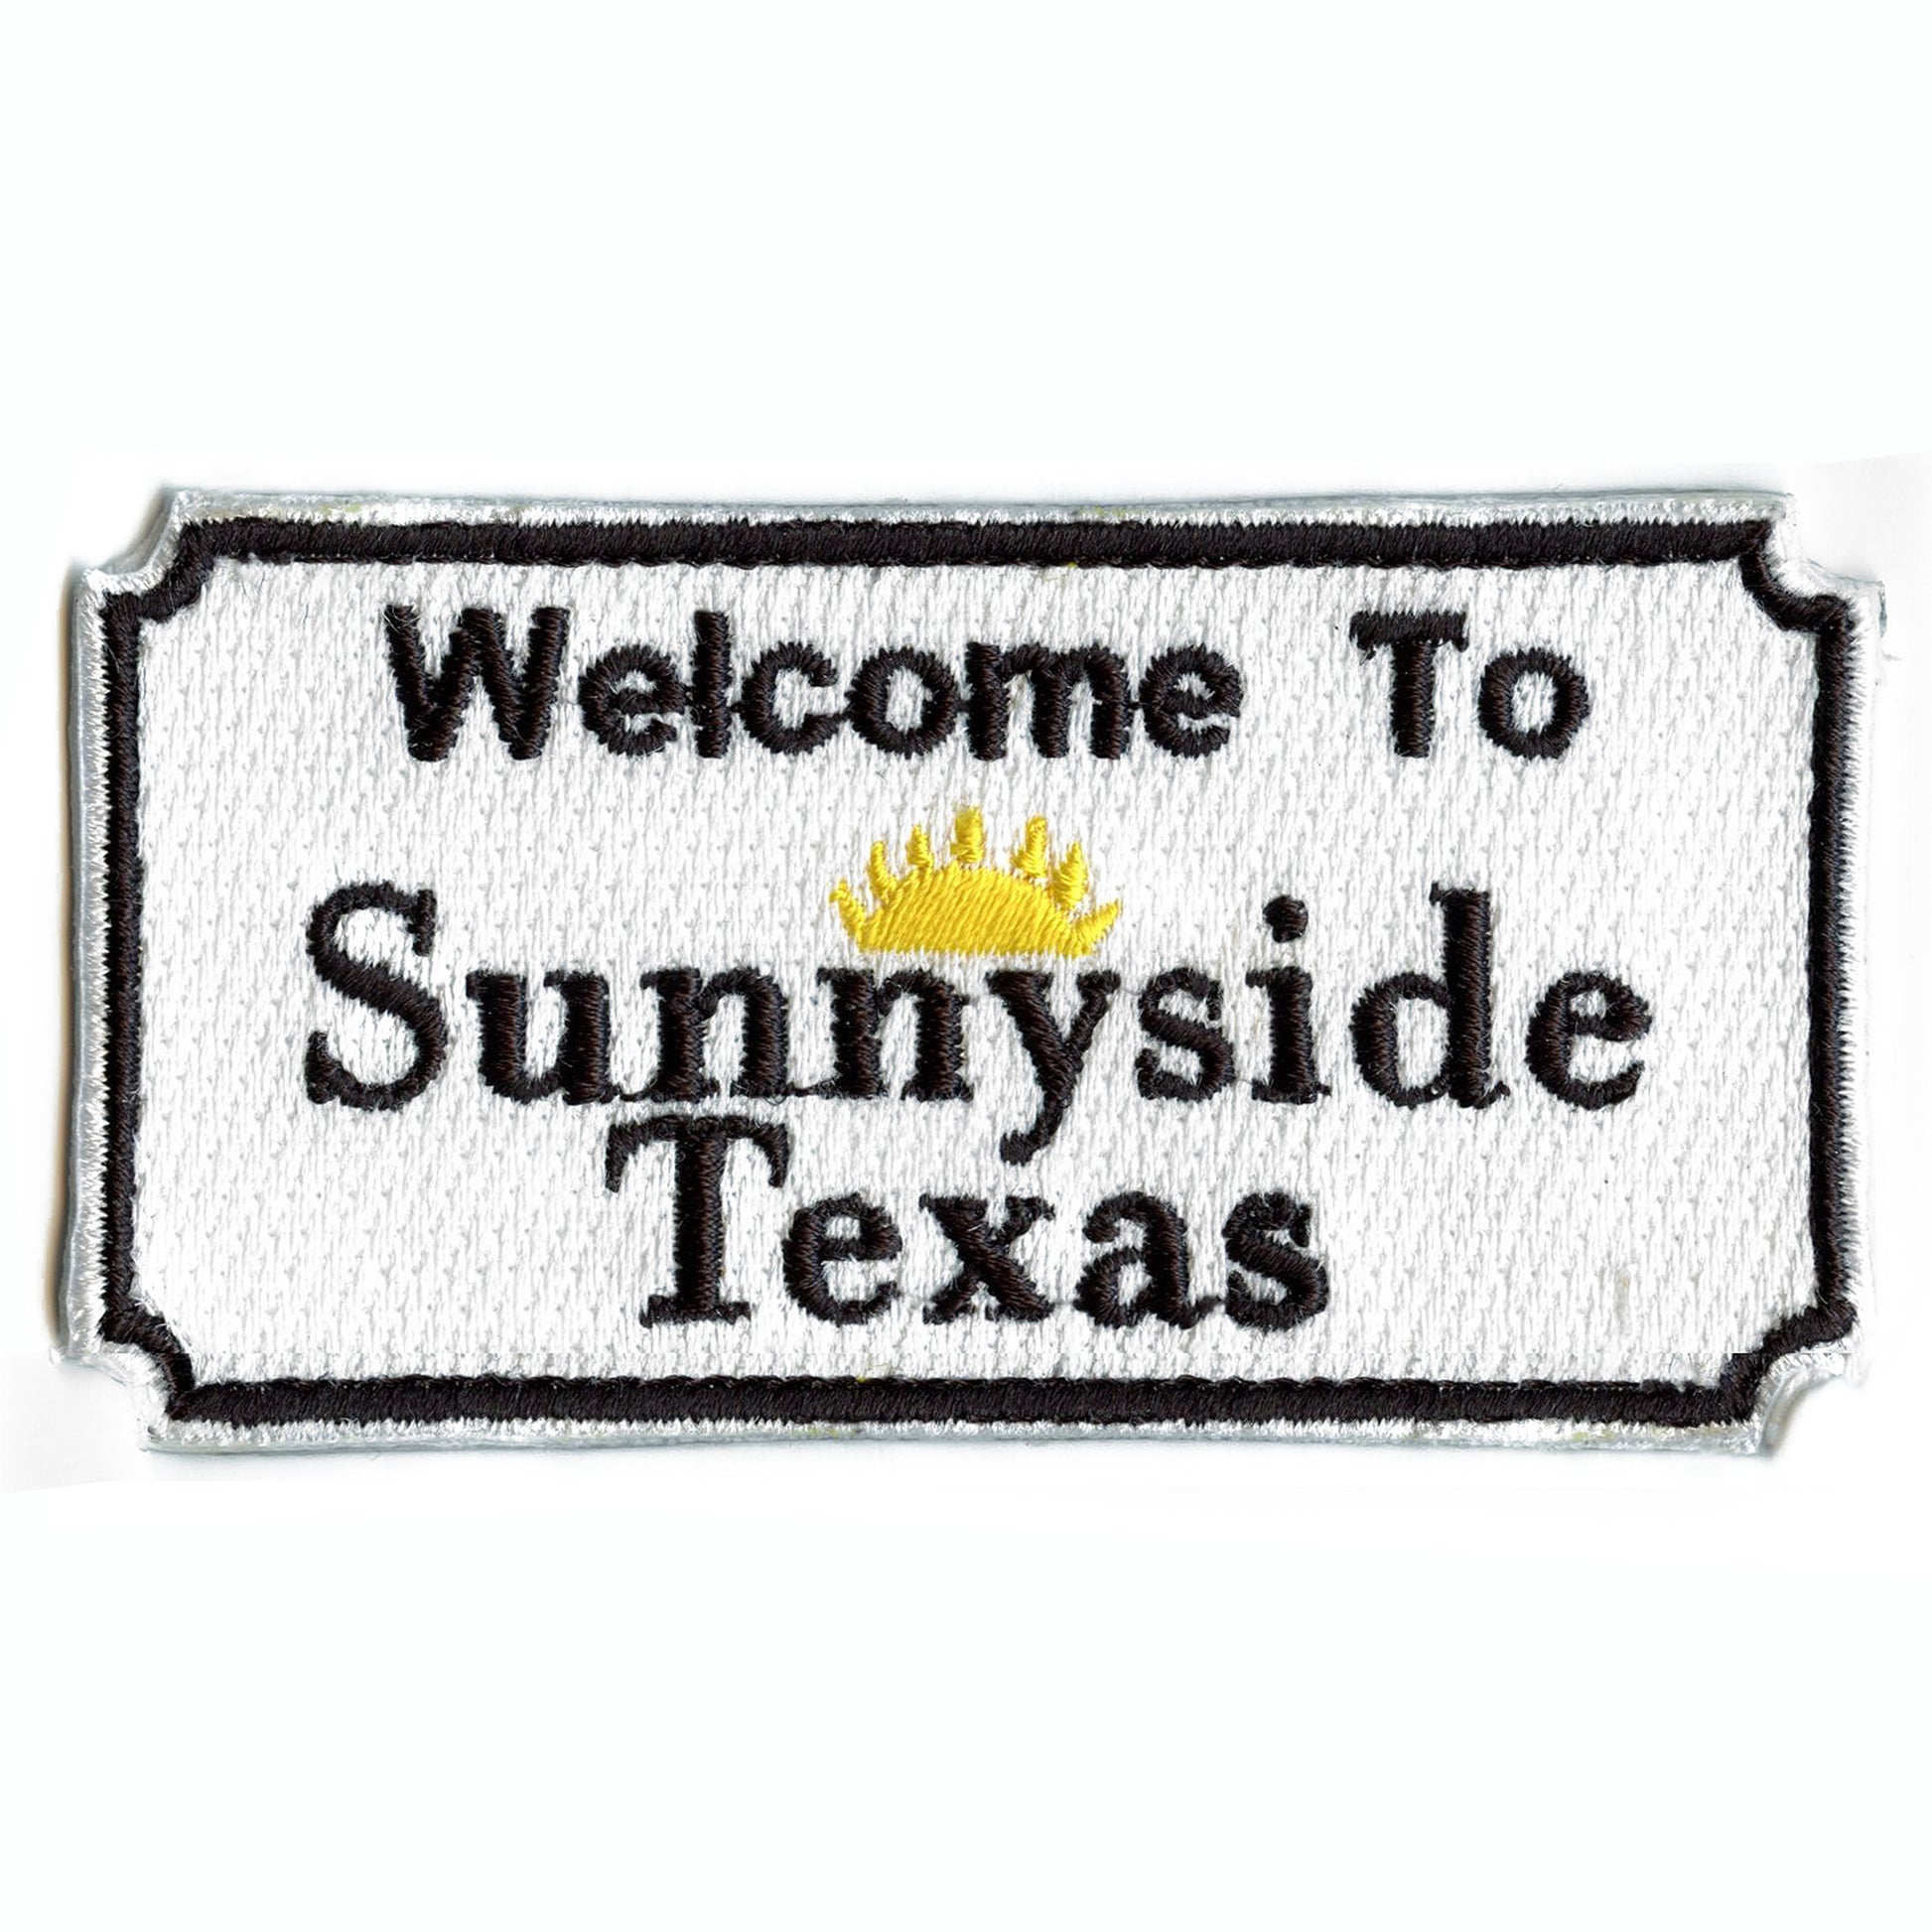 Welcome To Sunny Side Houston Texas Sign Embroidered Iron On Patch 